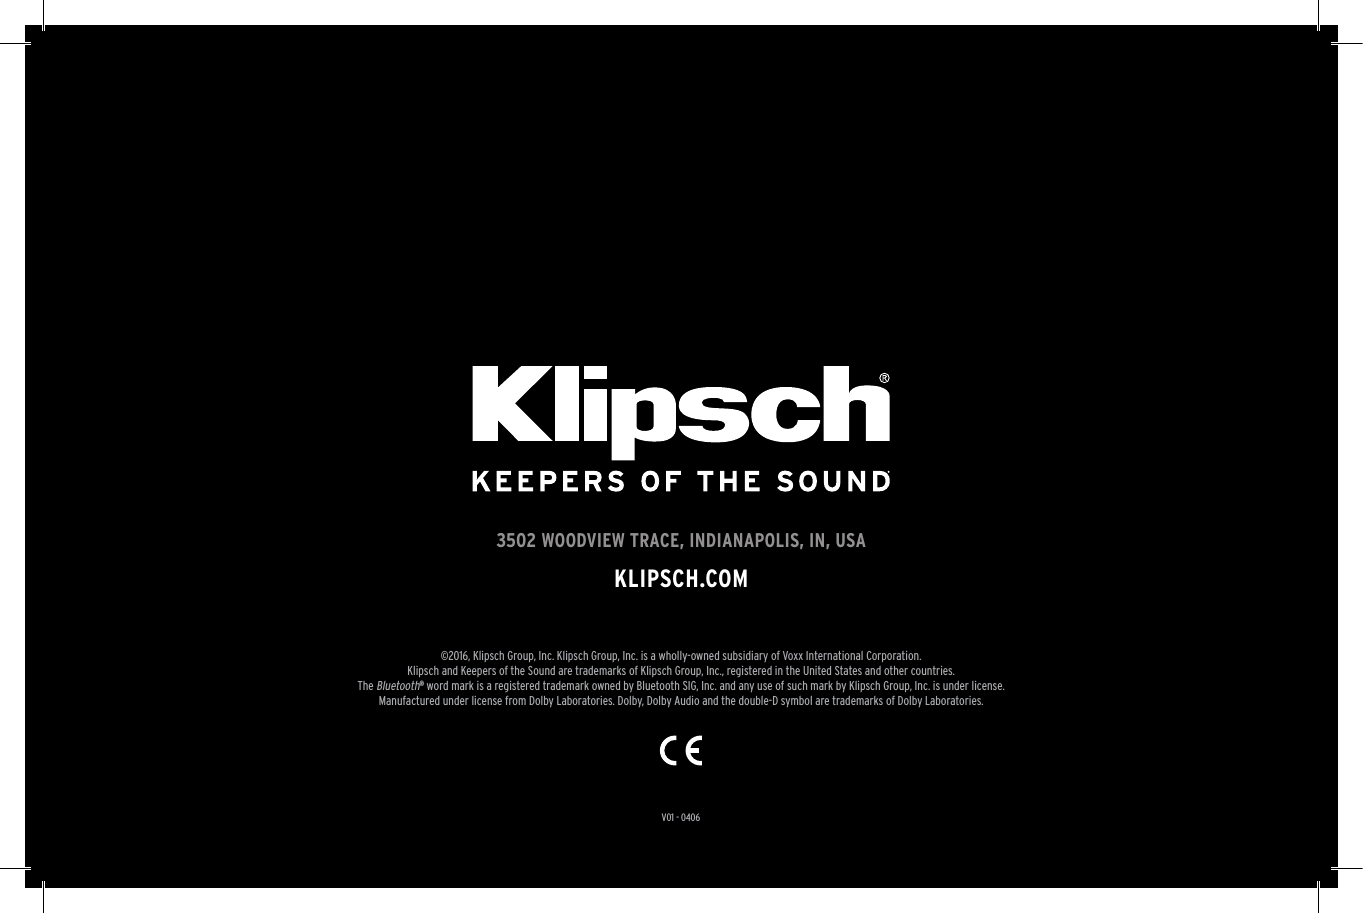 23V01 - 04063502 WOODVIEW TRACE, INDIANAPOLIS, IN, USAKLIPSCH.COM©2016, Klipsch Group, Inc. Klipsch Group, Inc. is a wholly-owned subsidiary of Voxx International Corporation.Klipsch and Keepers of the Sound are trademarks of Klipsch Group, Inc., registered in the United States and other countries.The Bluetooth® word mark is a registered trademark owned by Bluetooth SIG, Inc. and any use of such mark by Klipsch Group, Inc. is under license. Manufactured under license from Dolby Laboratories. Dolby, Dolby Audio and the double-D symbol are trademarks of Dolby Laboratories.